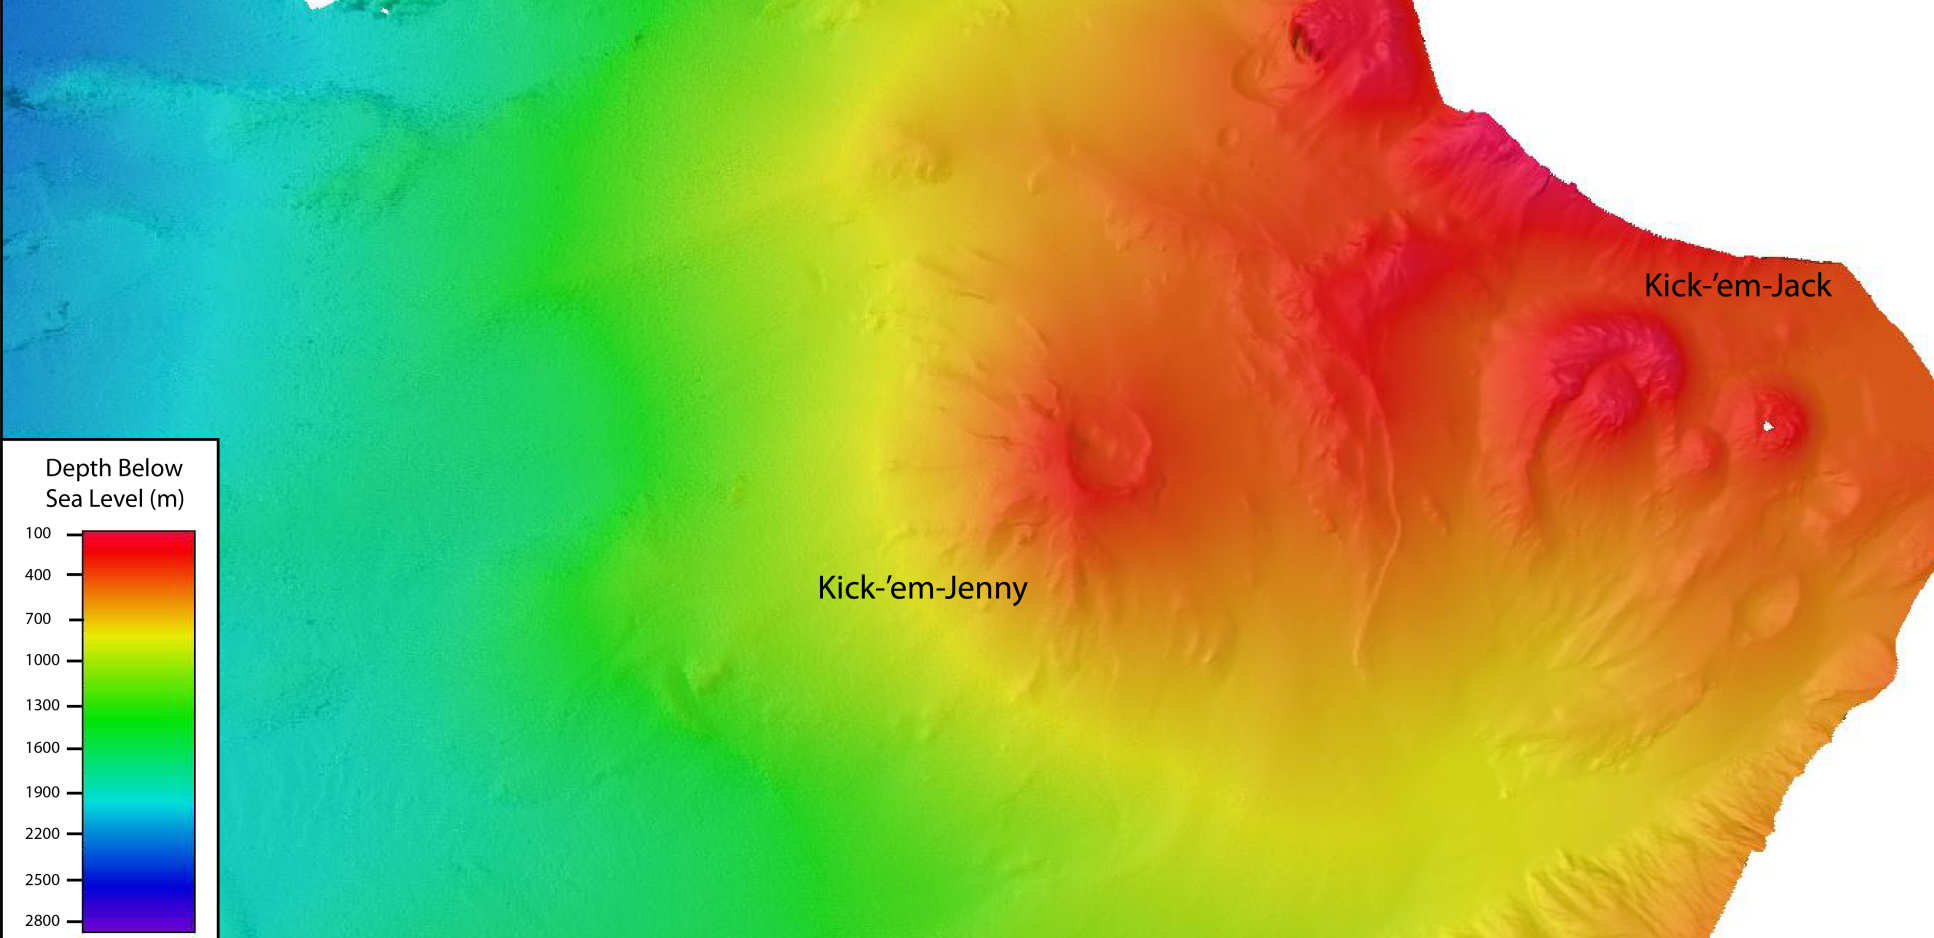 Plan view of the survey data, showing the position of the volcano